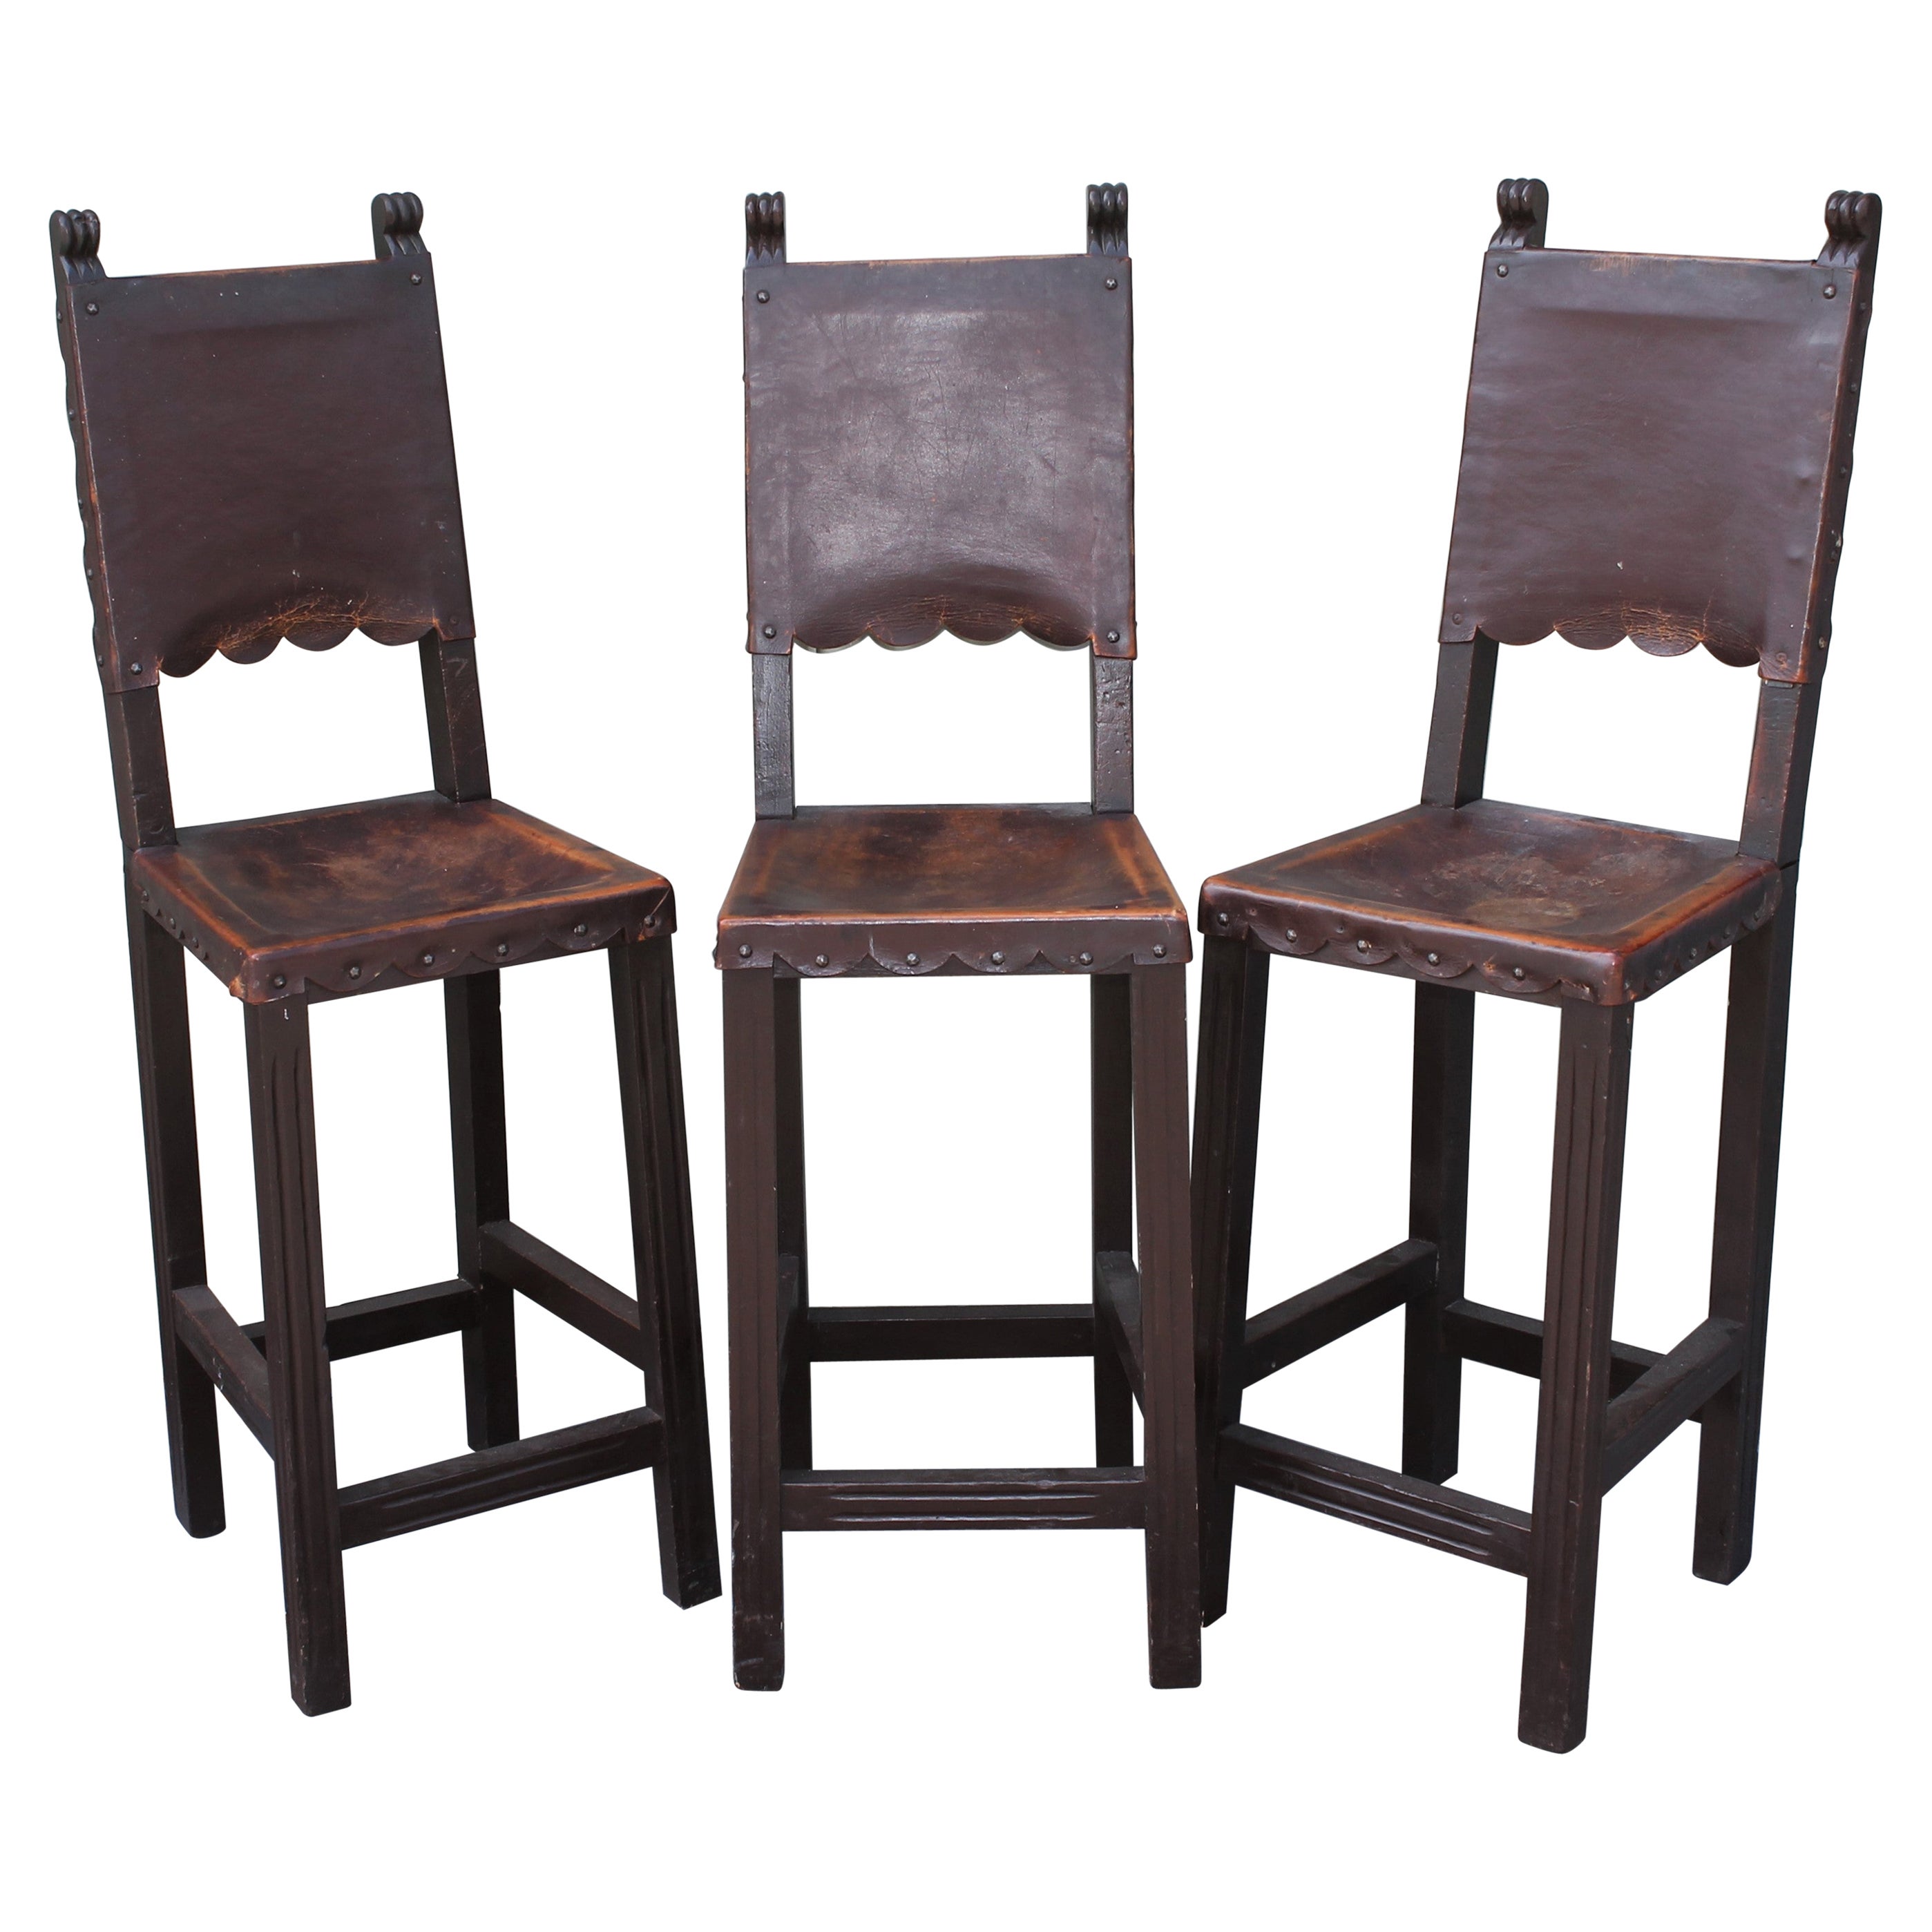 Spanish Style Bar Stools with Leather Seats -3